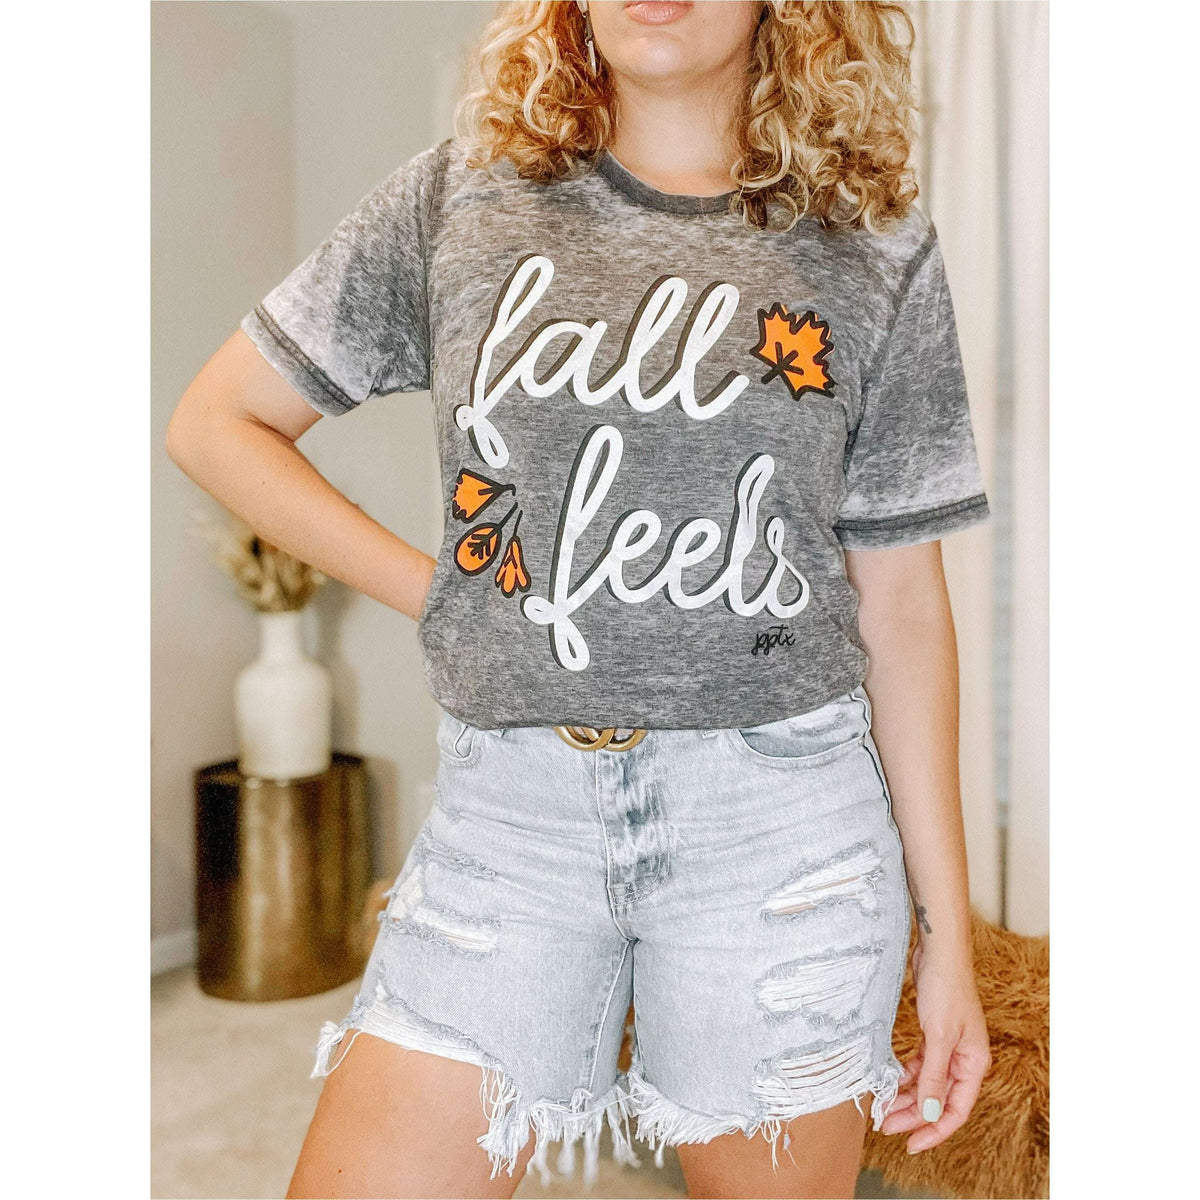 Fall Feels Vintage Tee - The Hive by Chris Jesselle